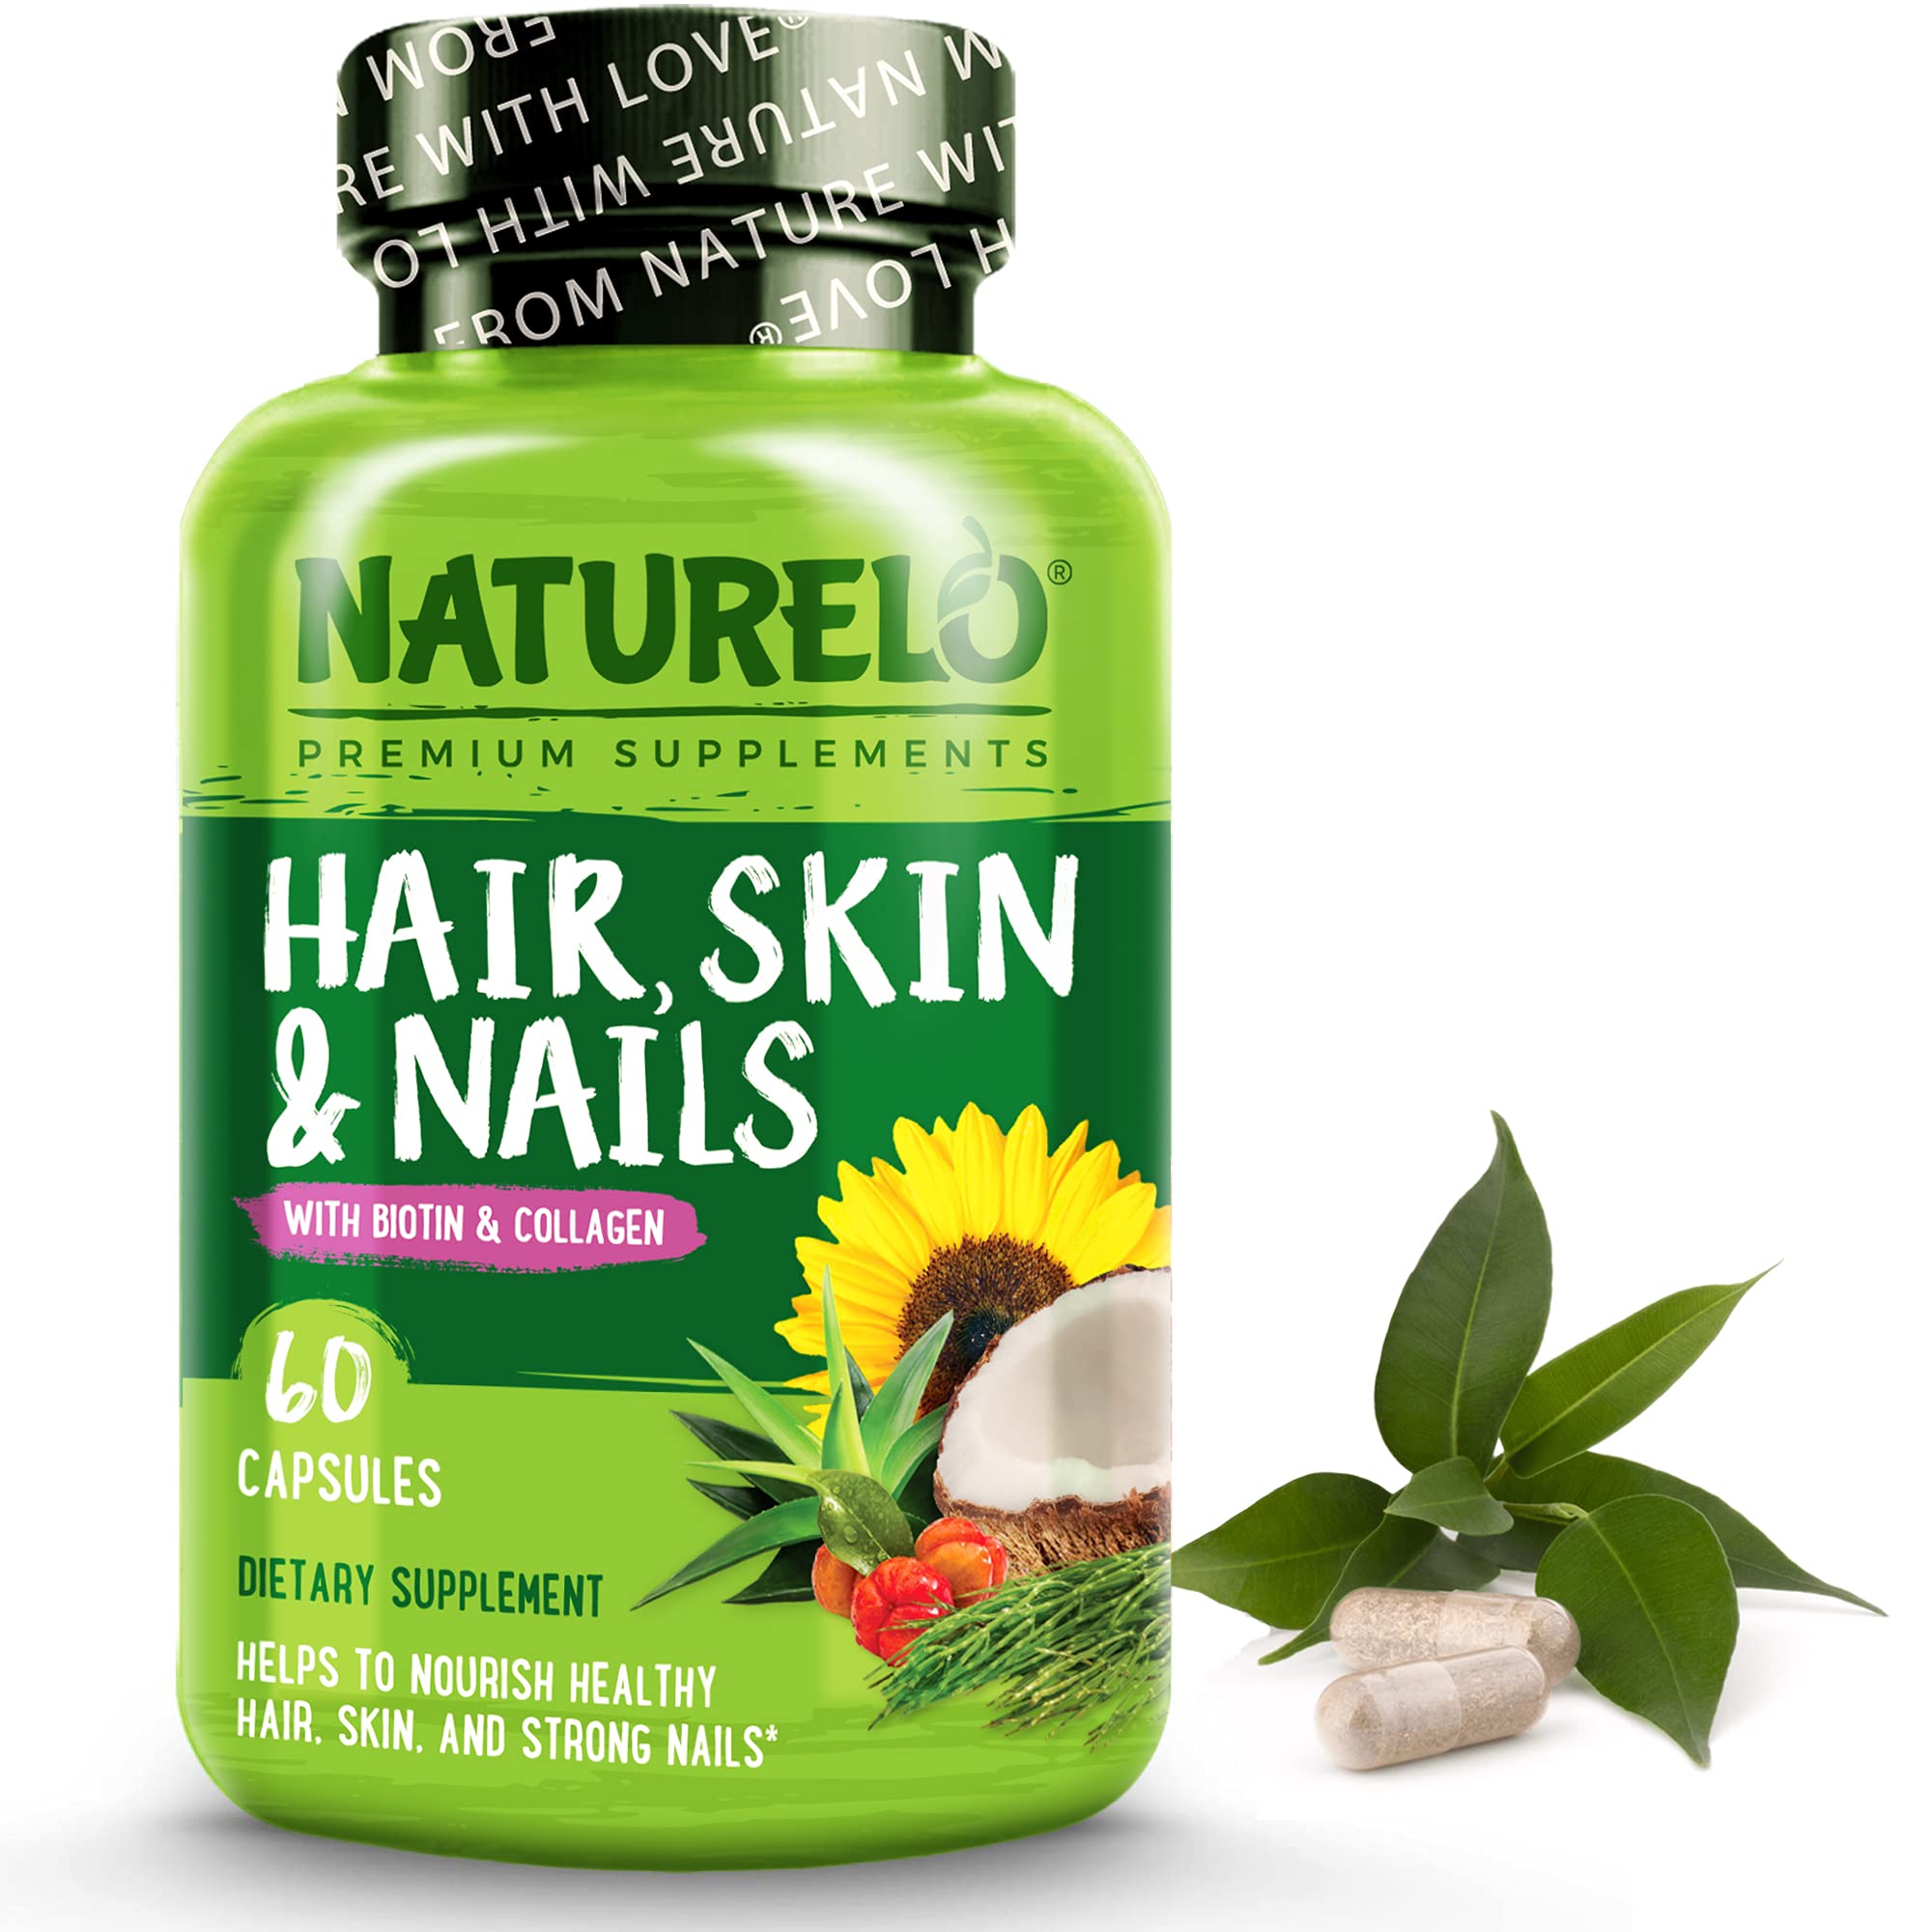 Book Cover NATURELO Hair, Skin and Nails Vitamins - 5000 mcg Biotin, Collagen, Natural Vitamin E - Supplement for Healthy Skin, Hair Growth for Women and Men – 60 Capsules Multivitamin + Biotin 60 Count (Pack of 1)